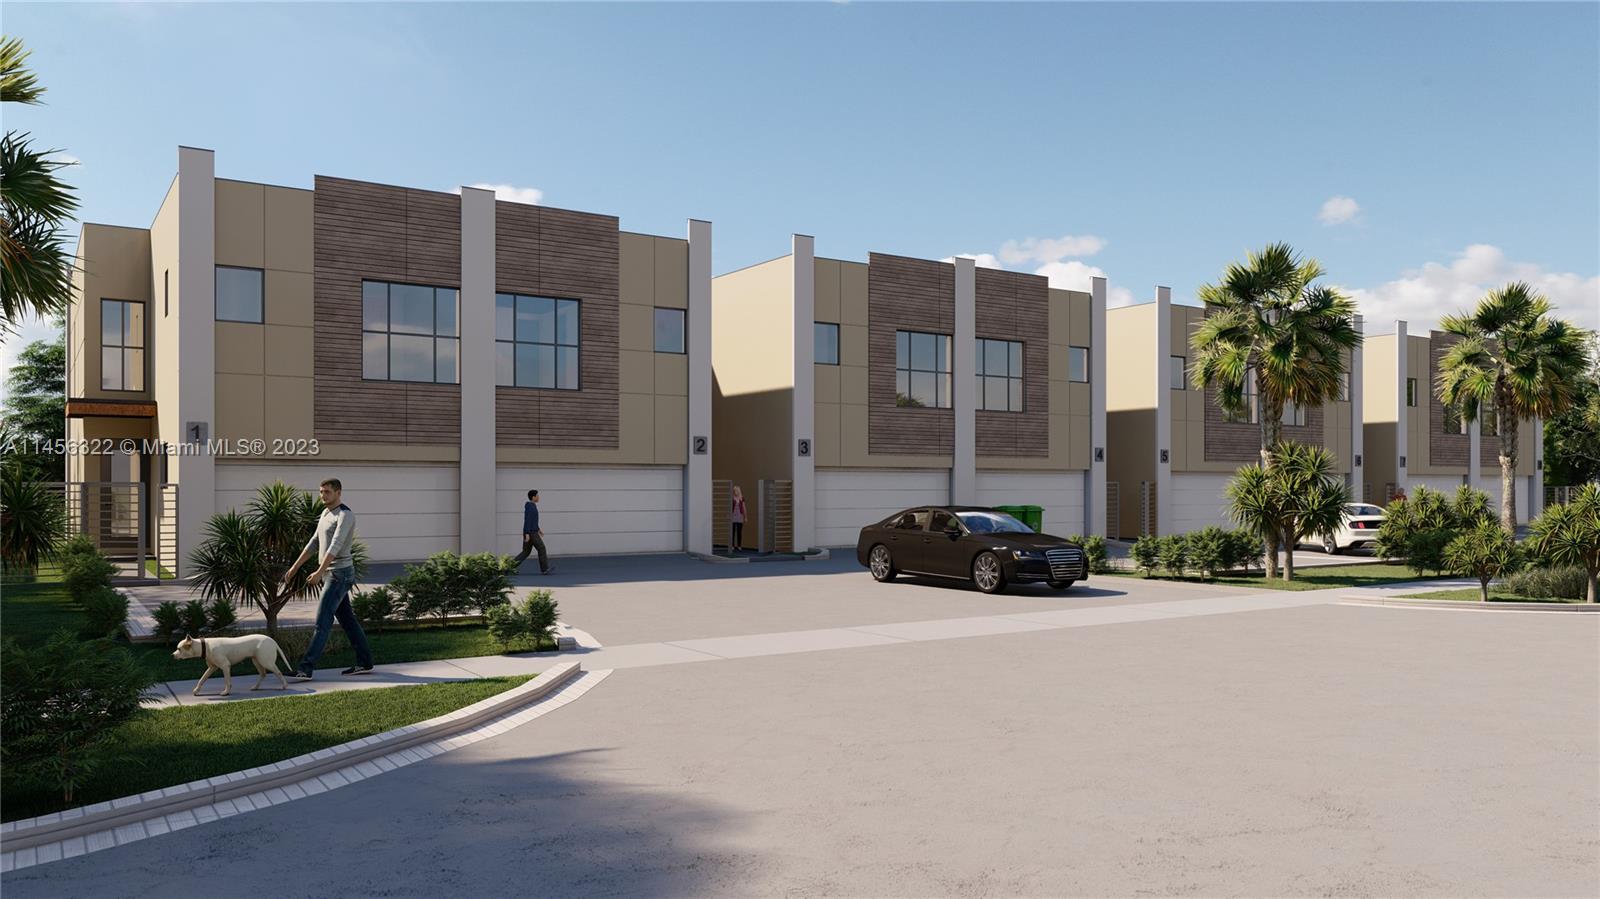 PRE-SALES! This is a pre-sale at the project. 24 month completion time for project. Welcome home to your elegant townhome designed by an established Oakland Park Developer. Every unit will have the feeling of a single family home w/ large bedrooms, bathrooms & living space. Your home will have a private backyard w/ an oversized 2 car garage & upscale finishes. Your kitchen will have a center island, tall cabinets w/ soft-close hardware & white Quartz counters and backsplash. Large ceramic tiles on the first floor with waterproof laminate floors on your stairs and throughout the second floor. Dual vanity sinks & a 2 person shower in your primary bathroom. Full size Washer & Dryer on the second floor in a huge laundry room. Upgrades available. Private community with only 8 homes.